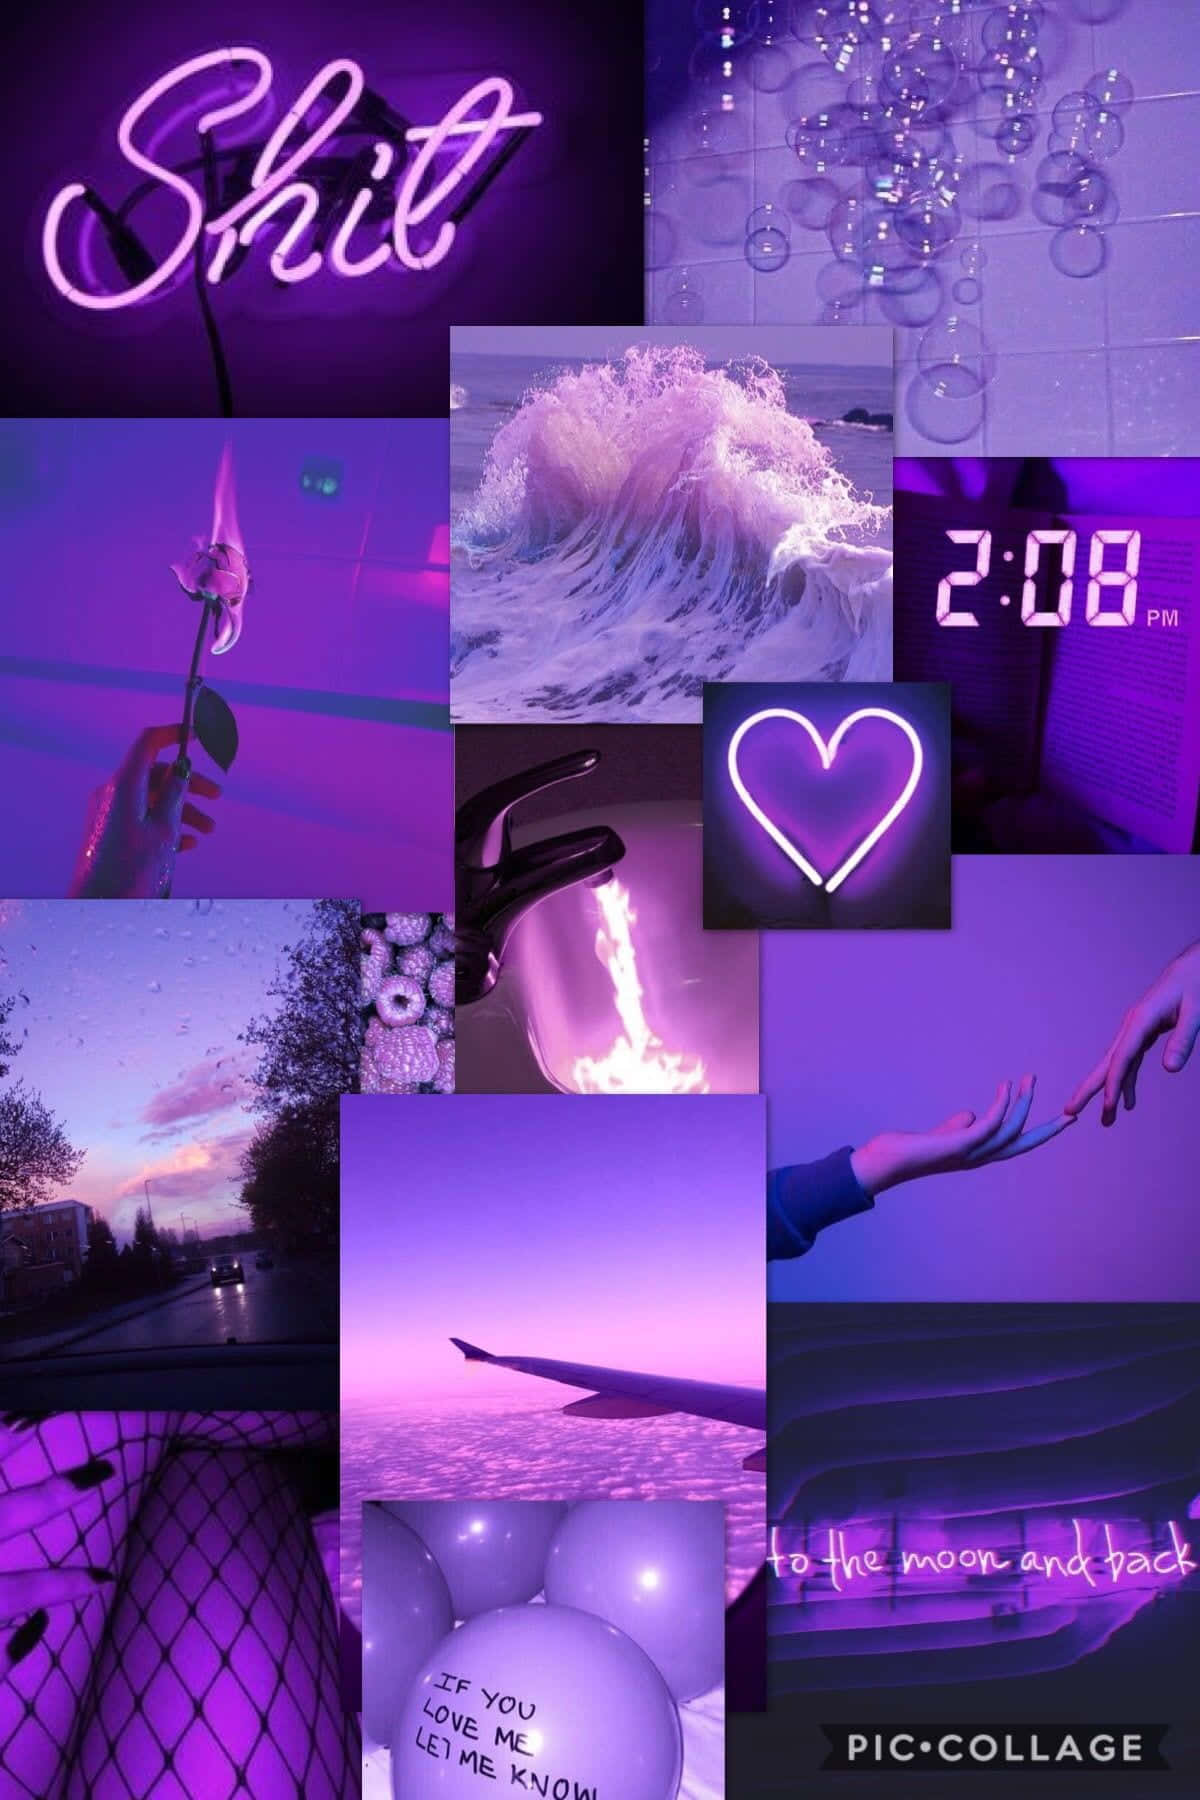 A Collage Of Photos With Purple Lights And A Clock Wallpaper